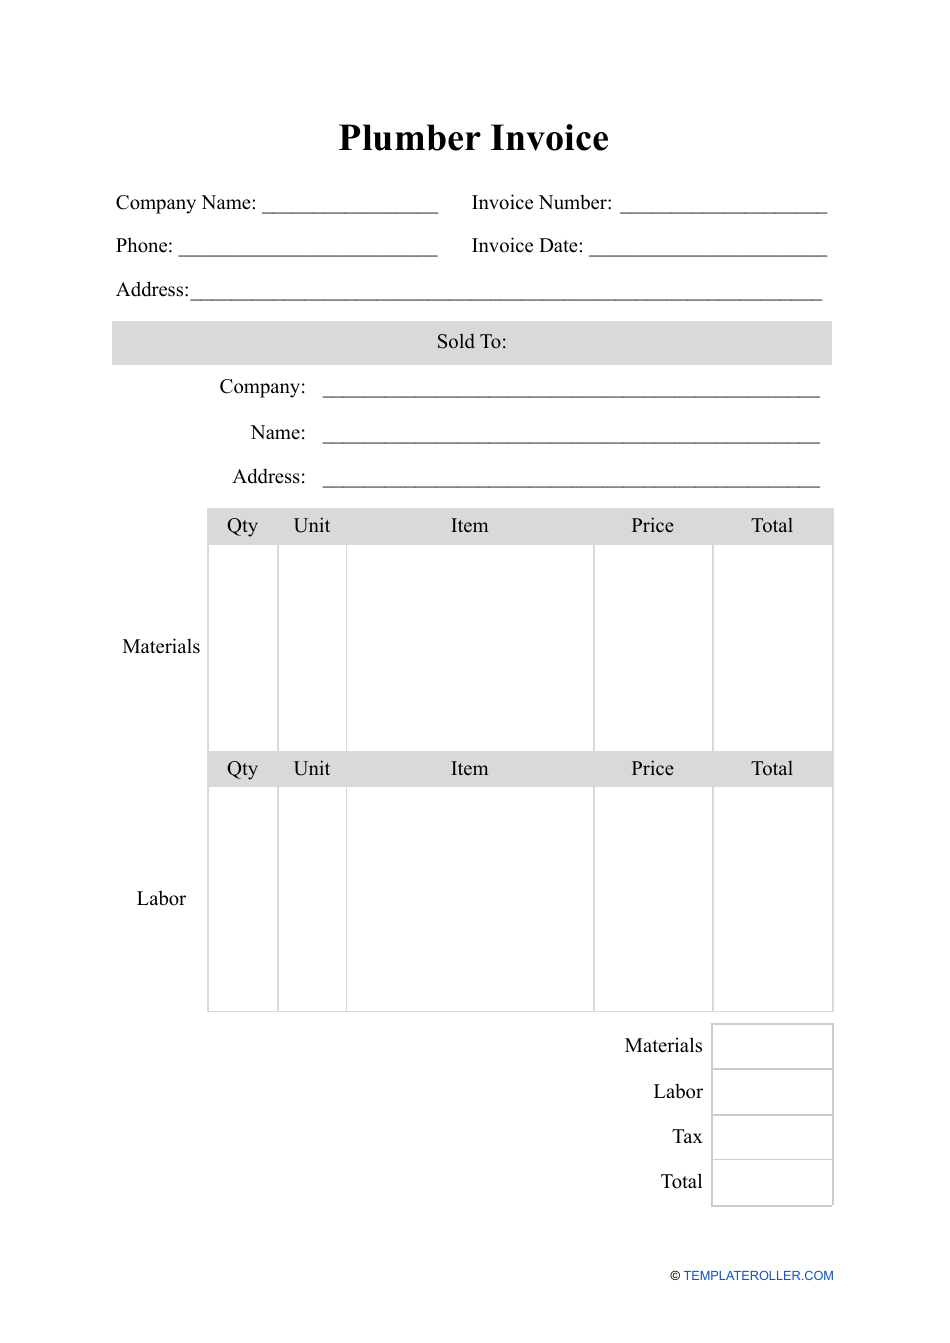 Plumber Invoice Template Fill Out, Sign Online and Download PDF